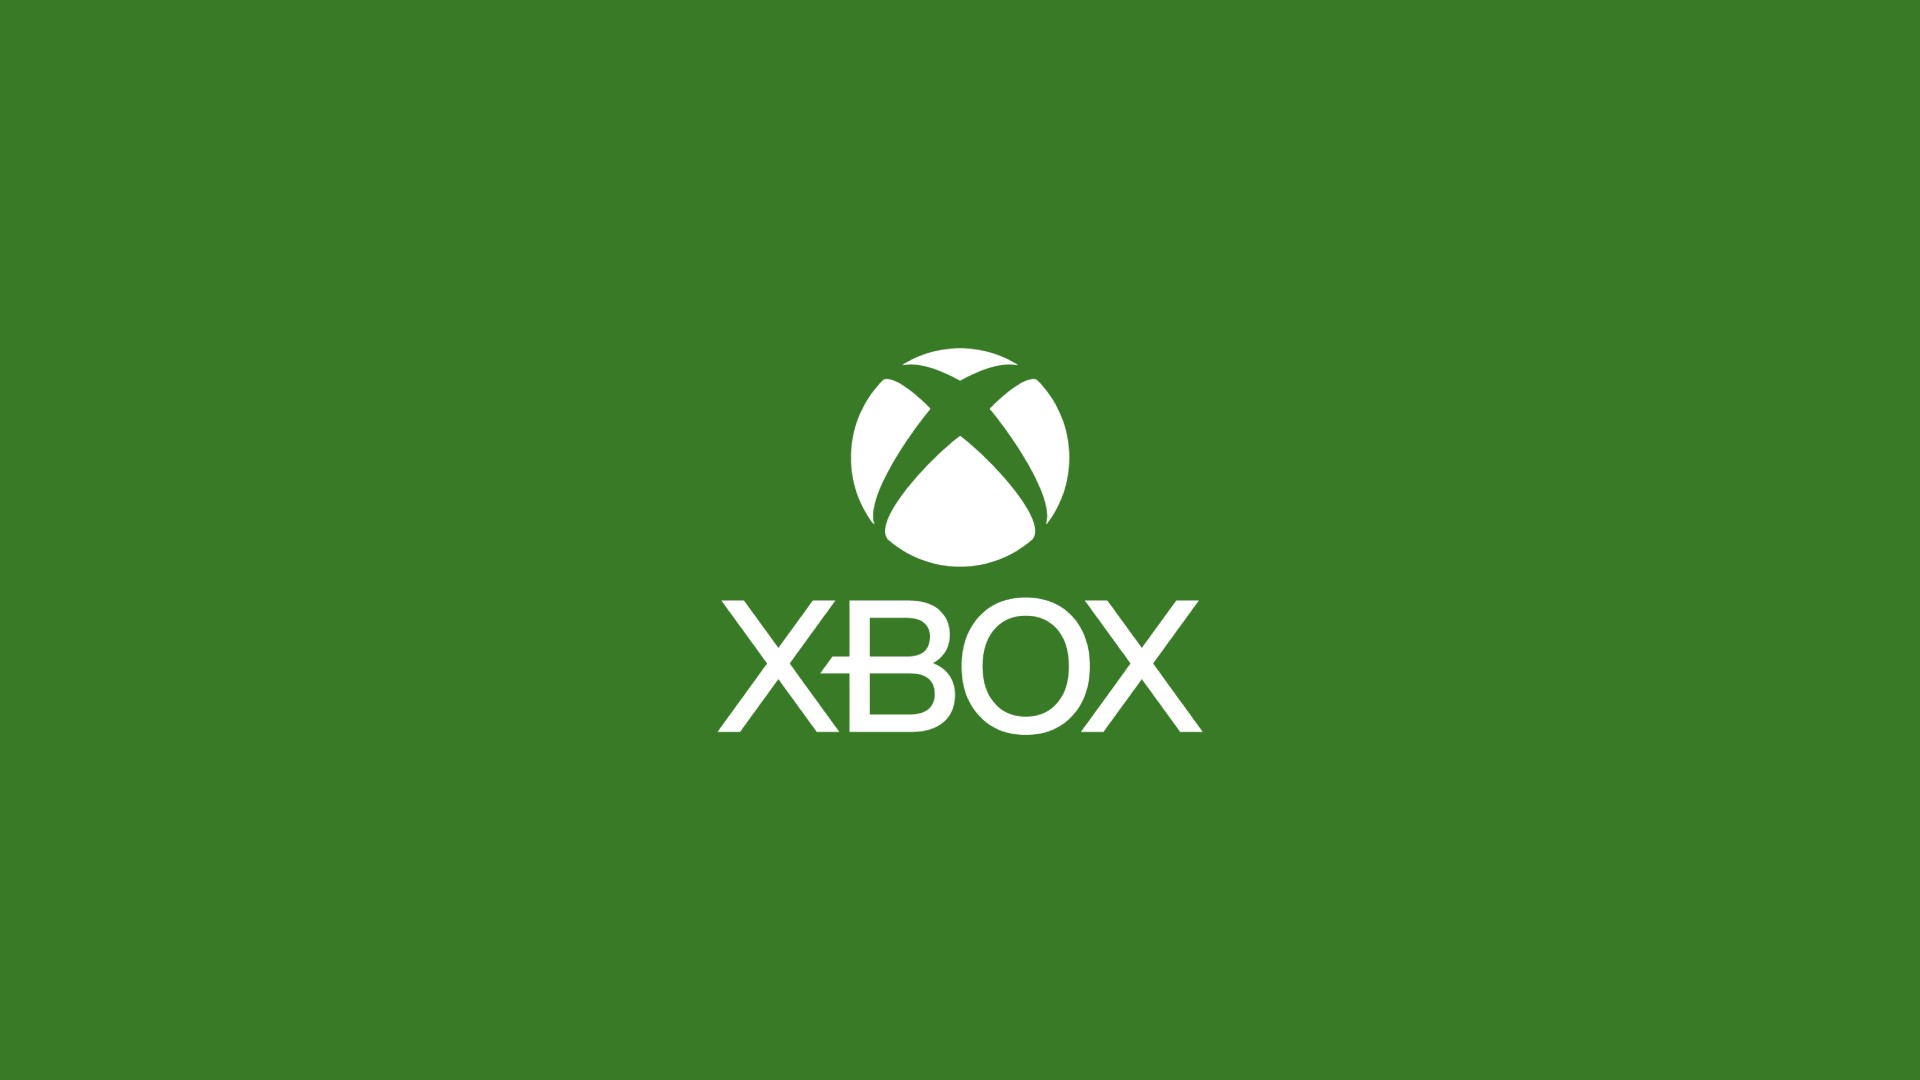 Xbox Business Updates to be Shared via Official Podcast This Week, Featuring Phil Spencer and More